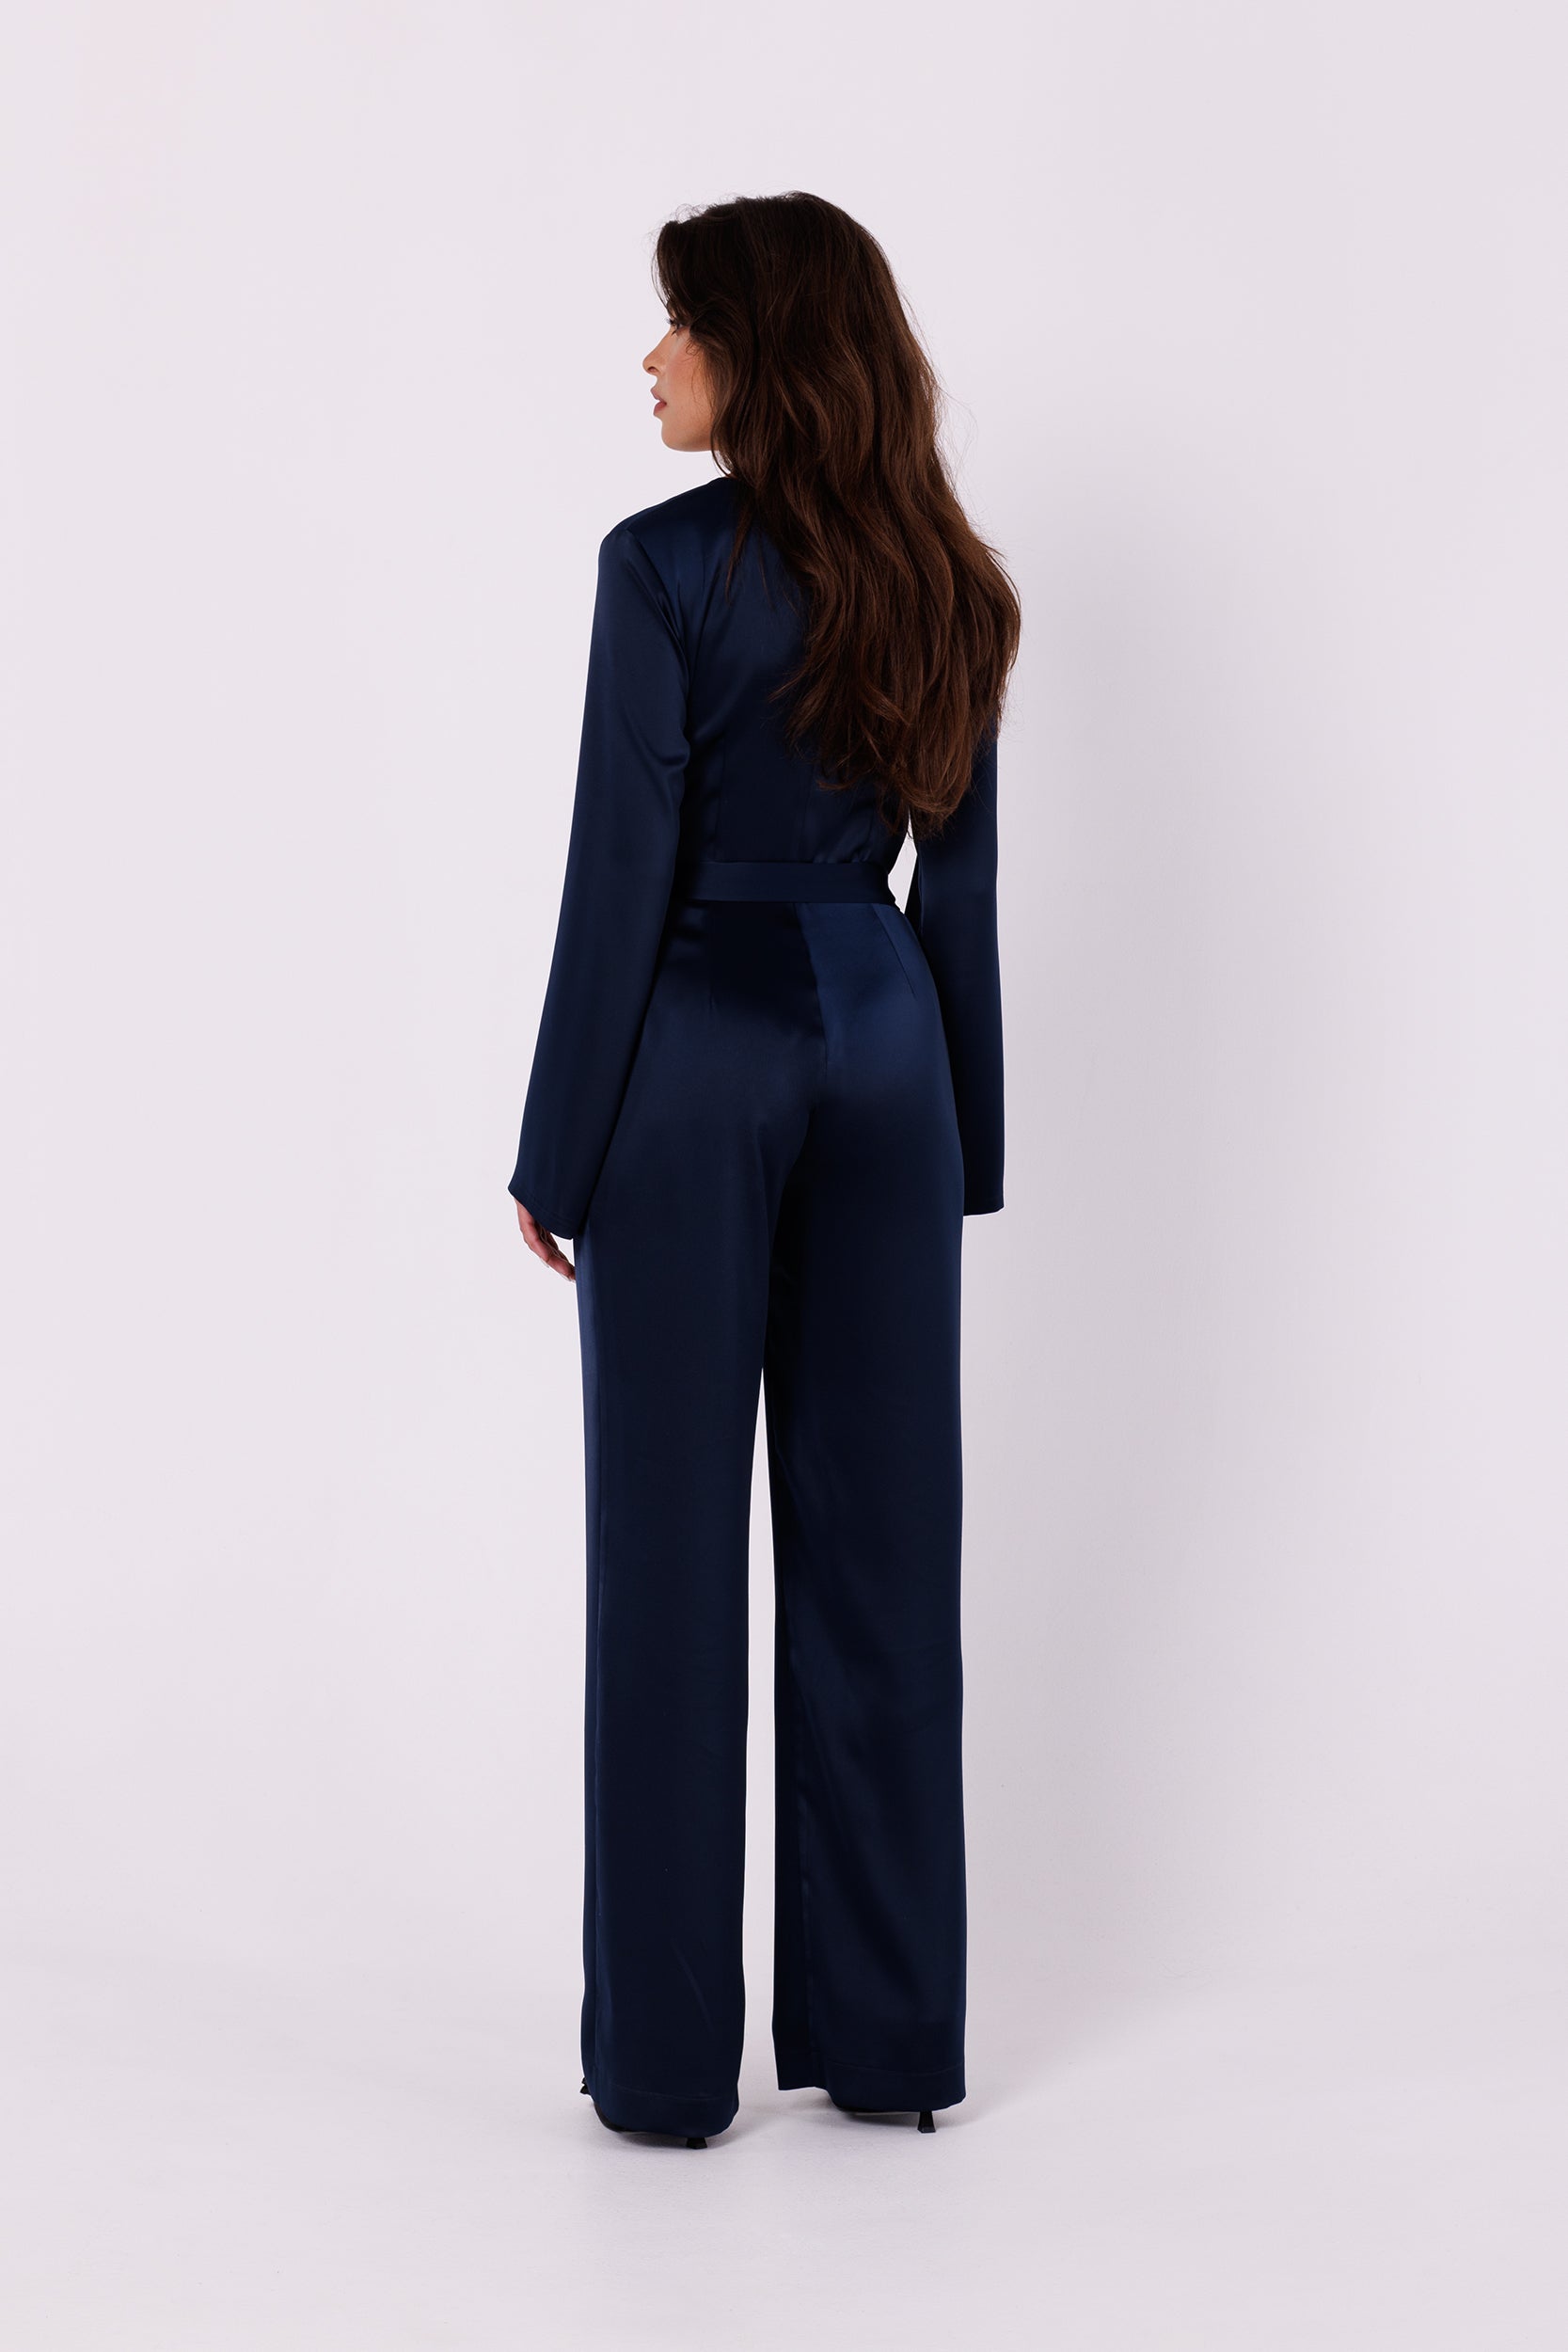 Long Sleeve Night Blue Satin Jumpsuit | Strictly In | Make a statement at your next event with our Long Sleeve Satin Jumpsuit. Crafted from luxurious satin, it features a V-neck, long sleeves, and a tied waist for a glamorous yet comfortable look. Perfect for the party season.